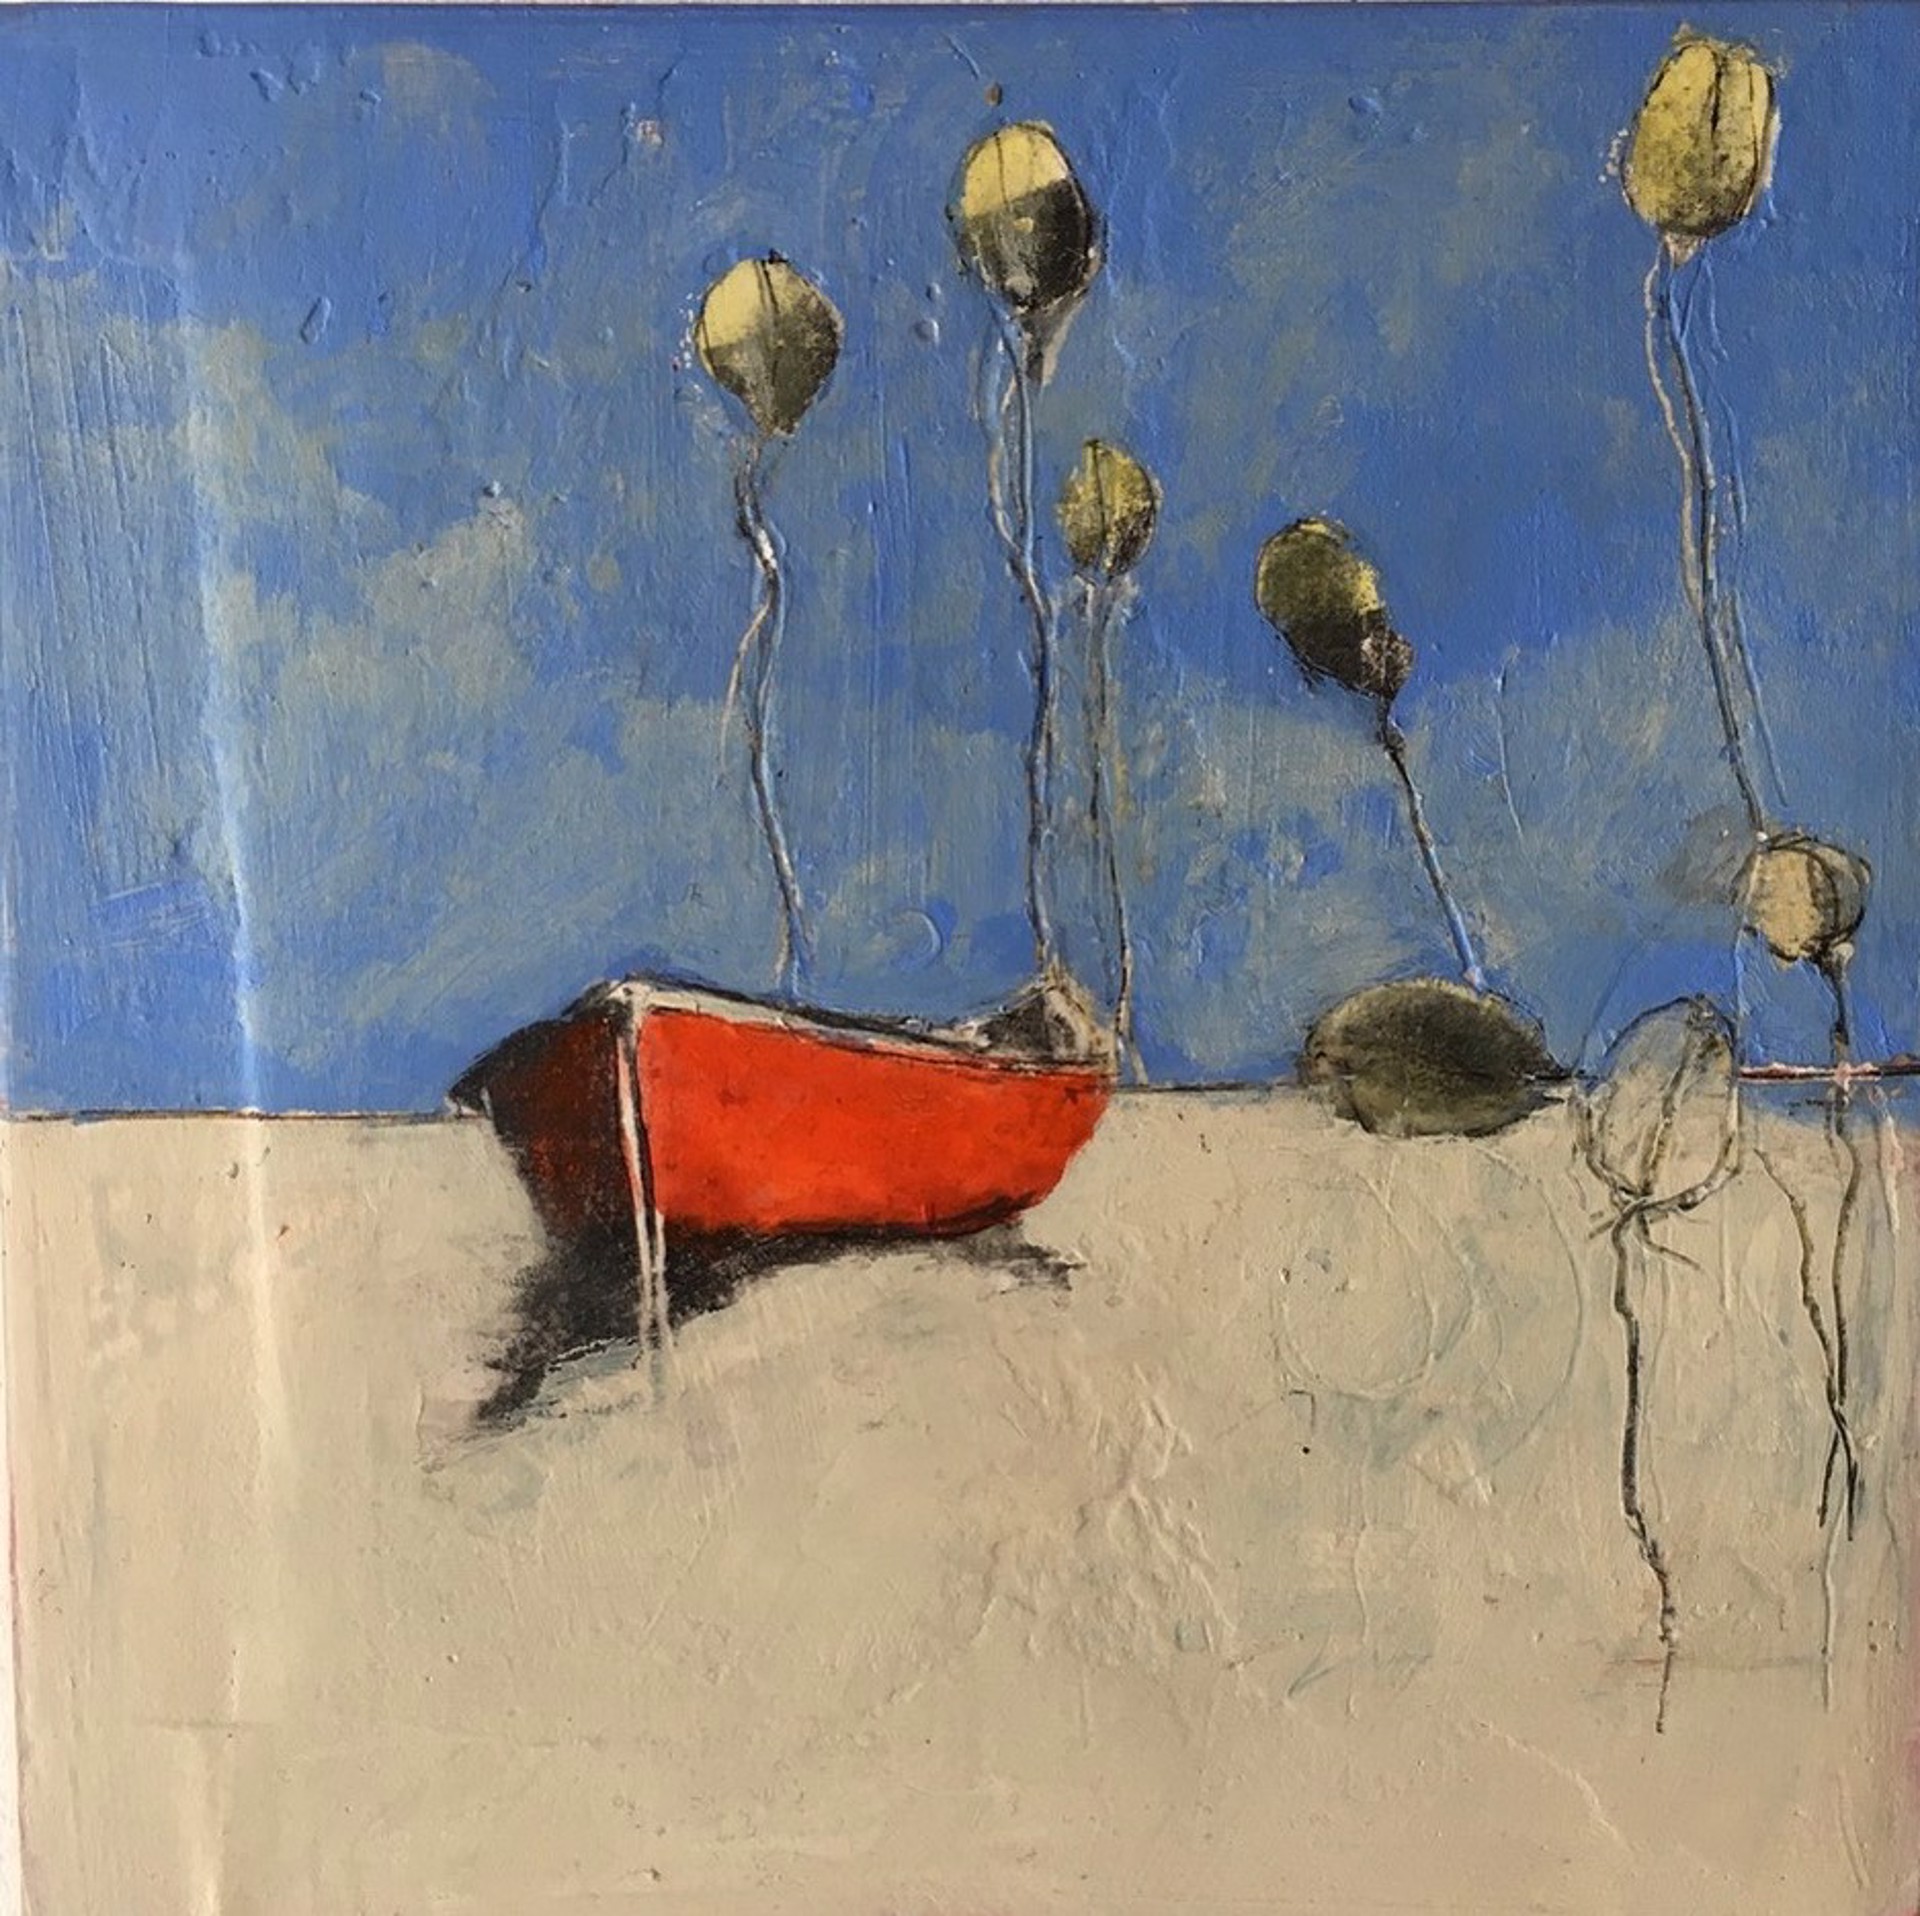 SEED PODS WITH BOAT by PATRICIA WHEELER